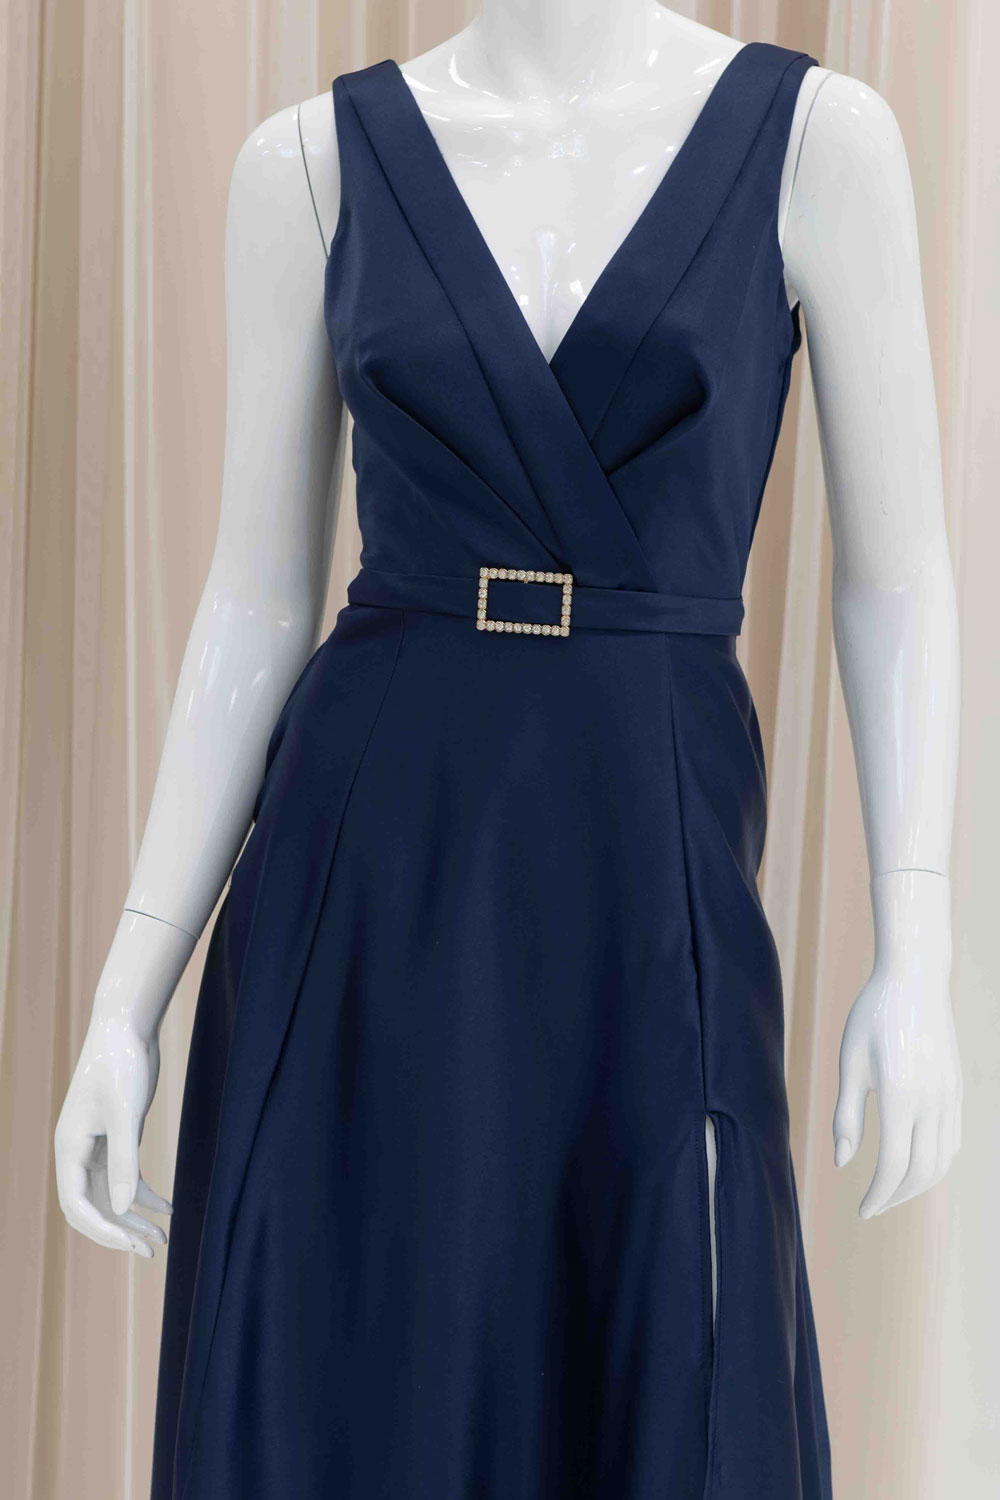 MOB Satin Navy Blue Gown with Pockets